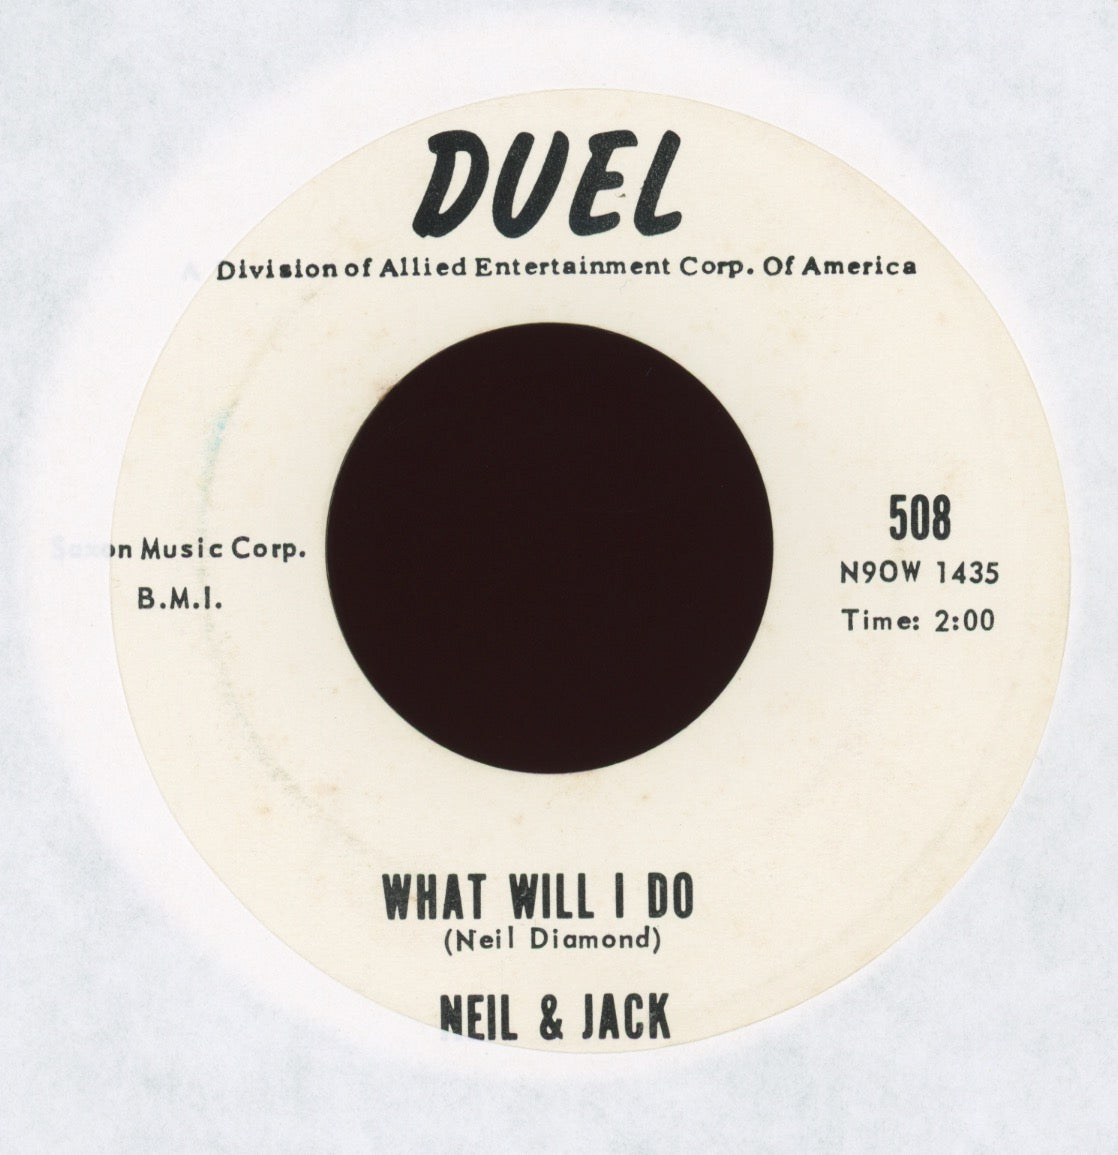 Neil & Jack - You Are My Love At Last on Duel